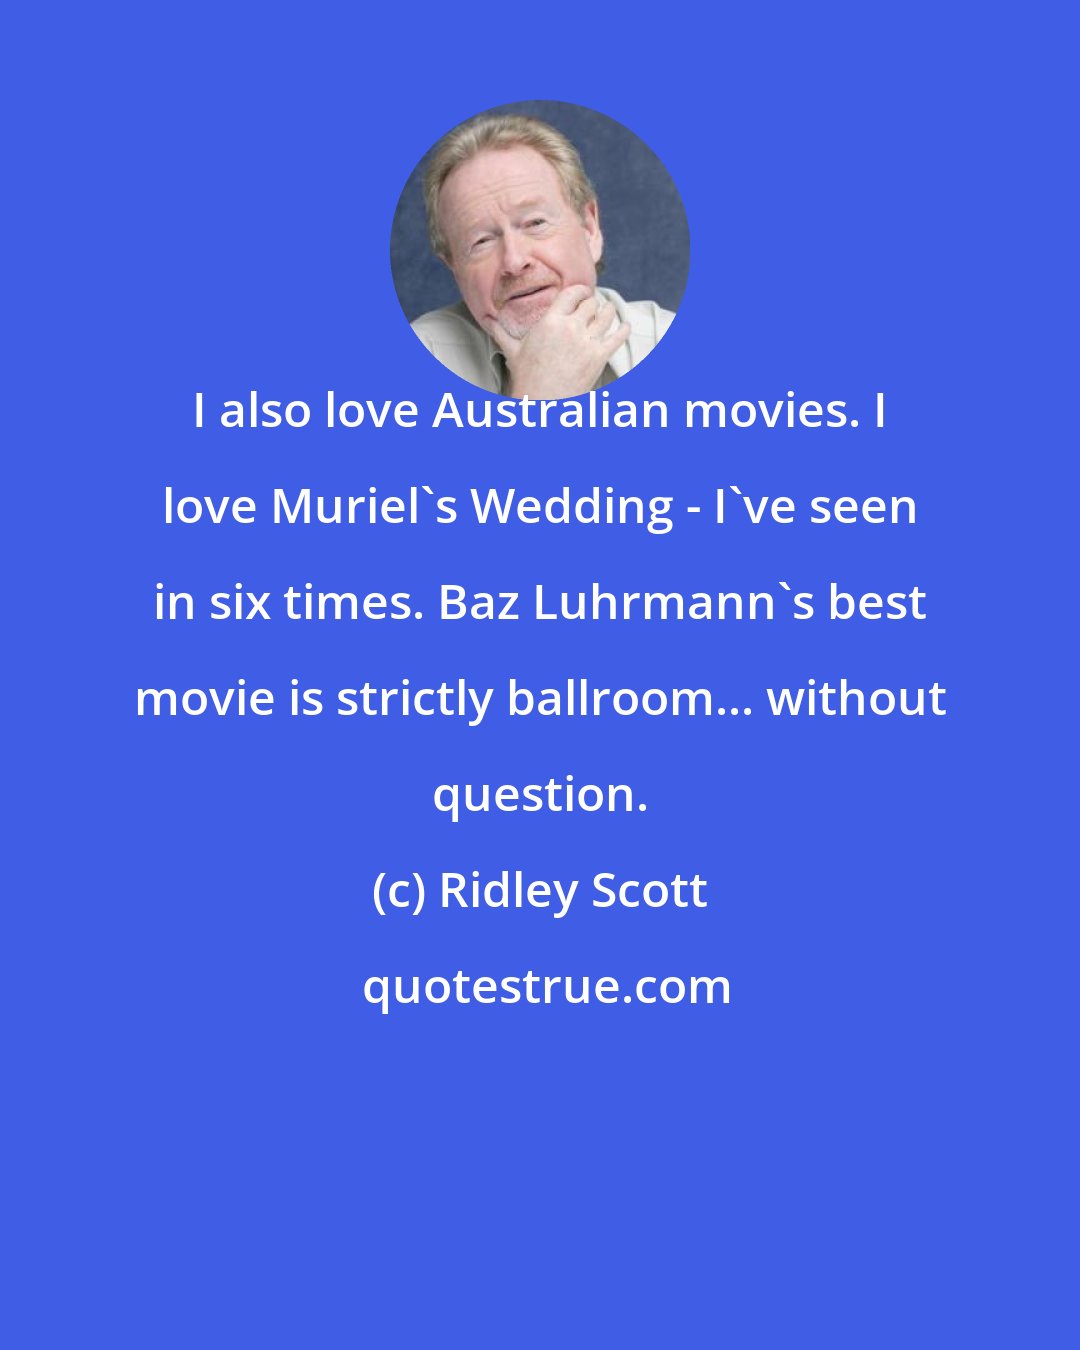 Ridley Scott: I also love Australian movies. I love Muriel's Wedding - I've seen in six times. Baz Luhrmann's best movie is strictly ballroom... without question.